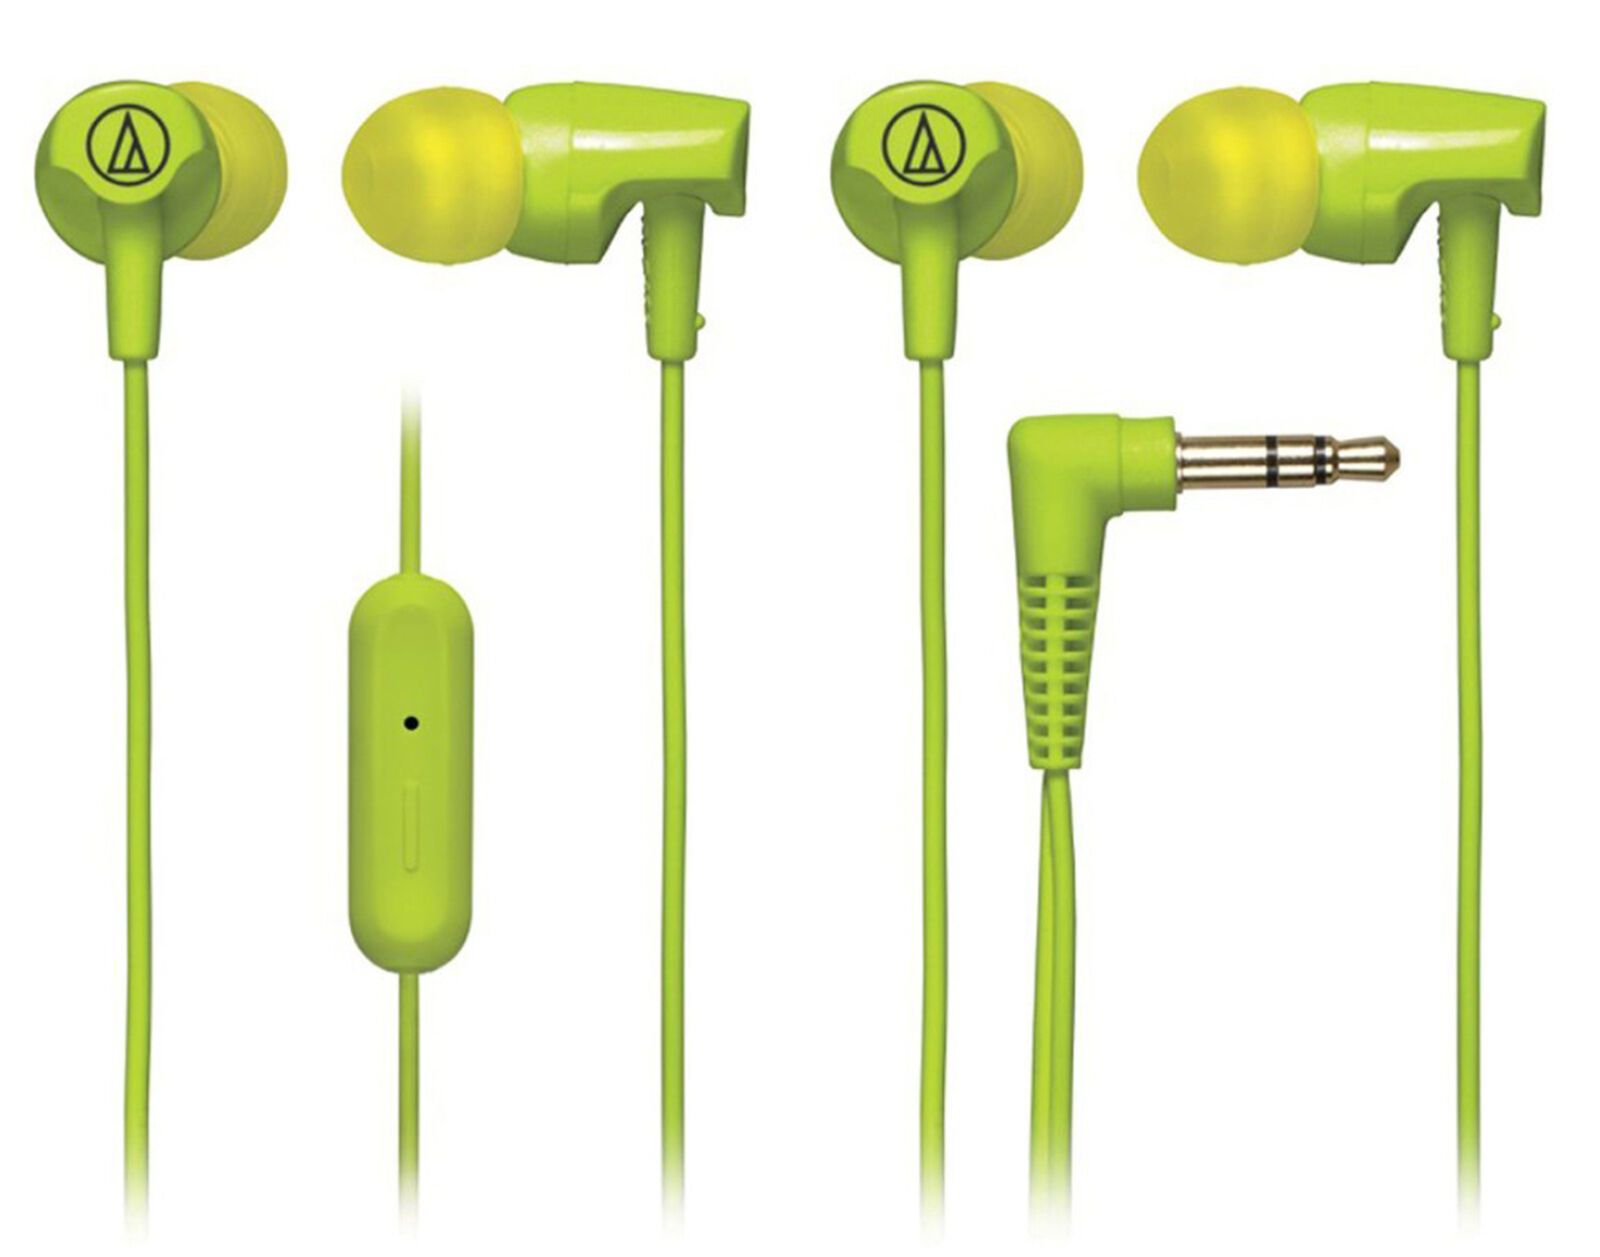 Primary image for Audio-Technica InEar Headphones with In-line Mic & Control-Green -ATH-CLR100ISLG